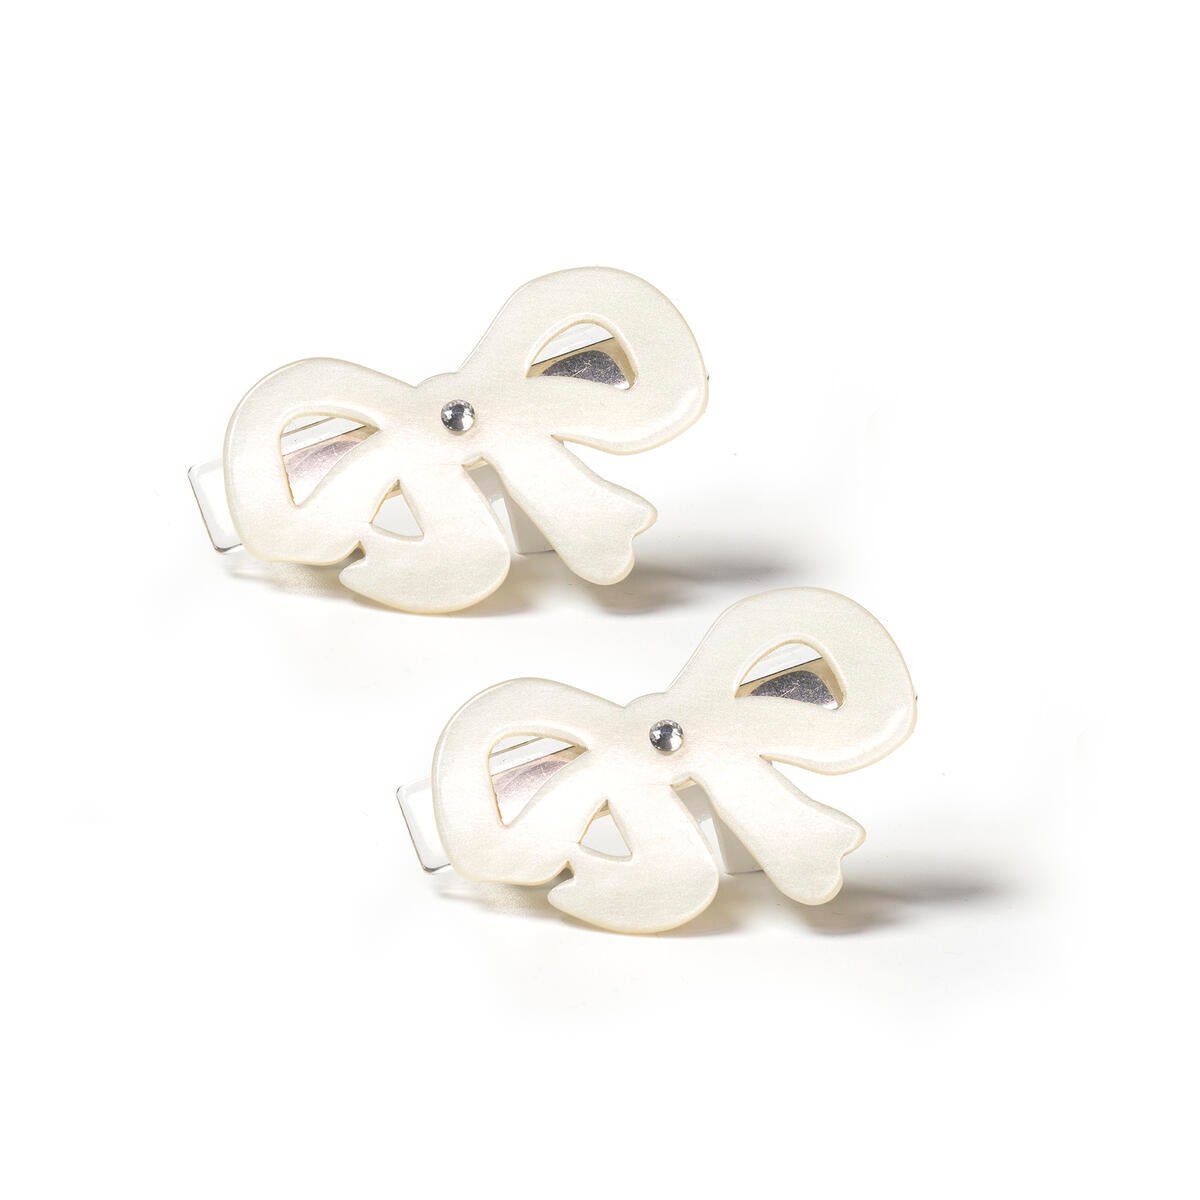 FANCY PEARLIZED BOW CLIPS (PREORDER) - LILIES & ROSES